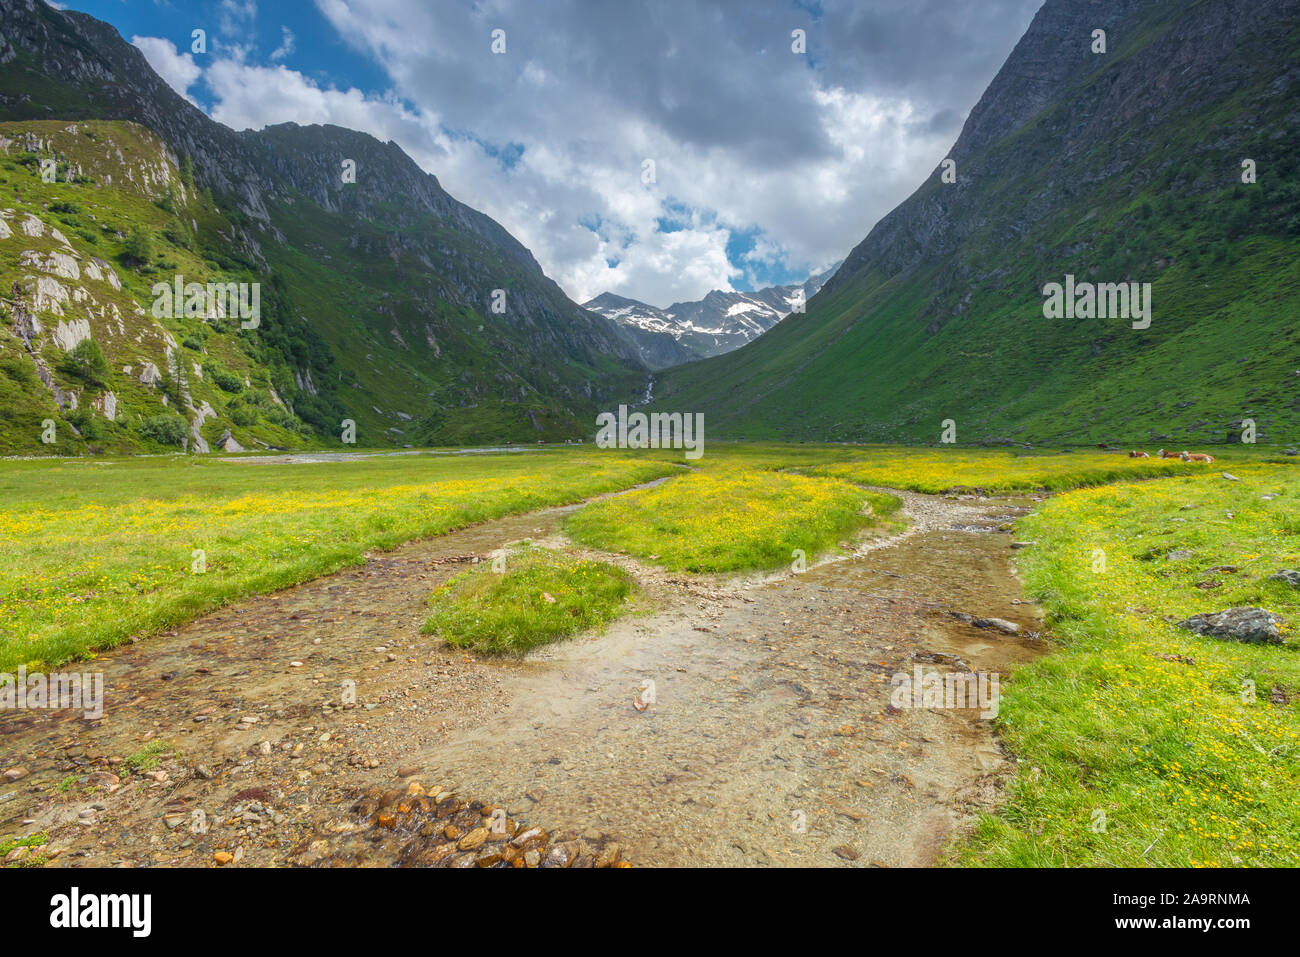 Beautiful alpine meadow carpeted with yellow wildflowers and crossed by a glacial stream. Idyllic mountain valley with flowers, shadowy mountains. Stock Photo